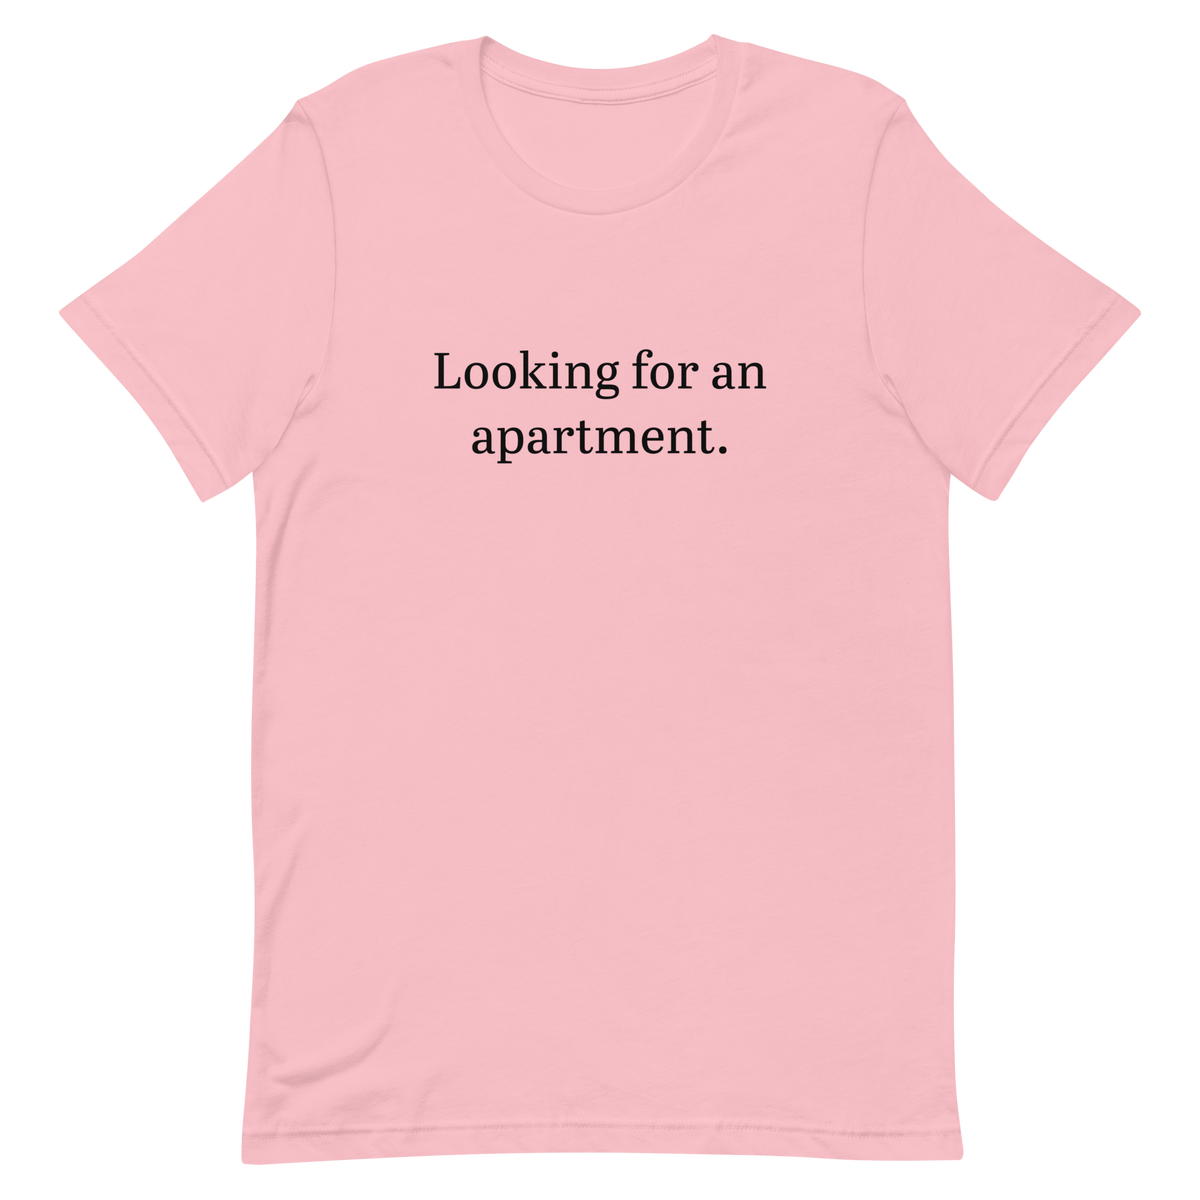 Looking for an apartment. T-Shirt